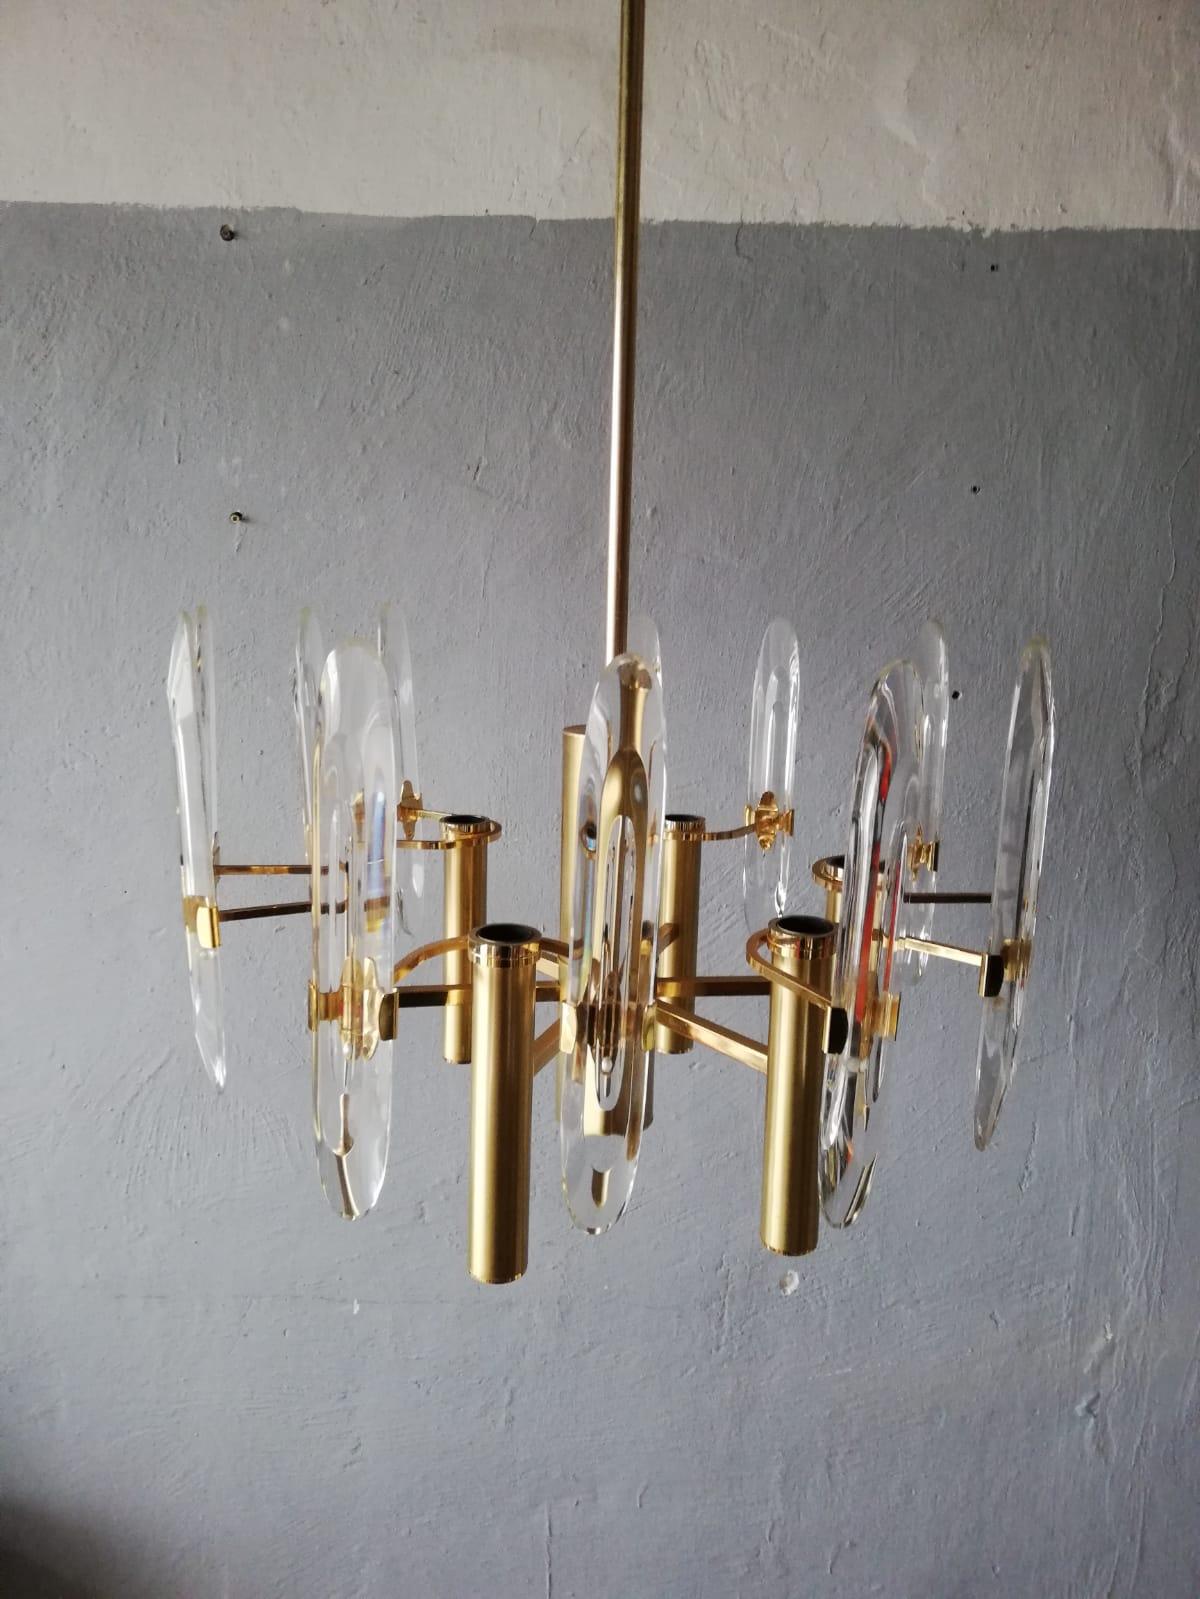 Polished brass & crystal prism 6 armed chandelier by Gaetano Sciolari, 1960s, Italy

Lamp is in very good vintage condition. Wonderful pendant lamp with brilliant shining crystal glasses. 

This lamp works with 6x E14 light bulbs.
Wired and